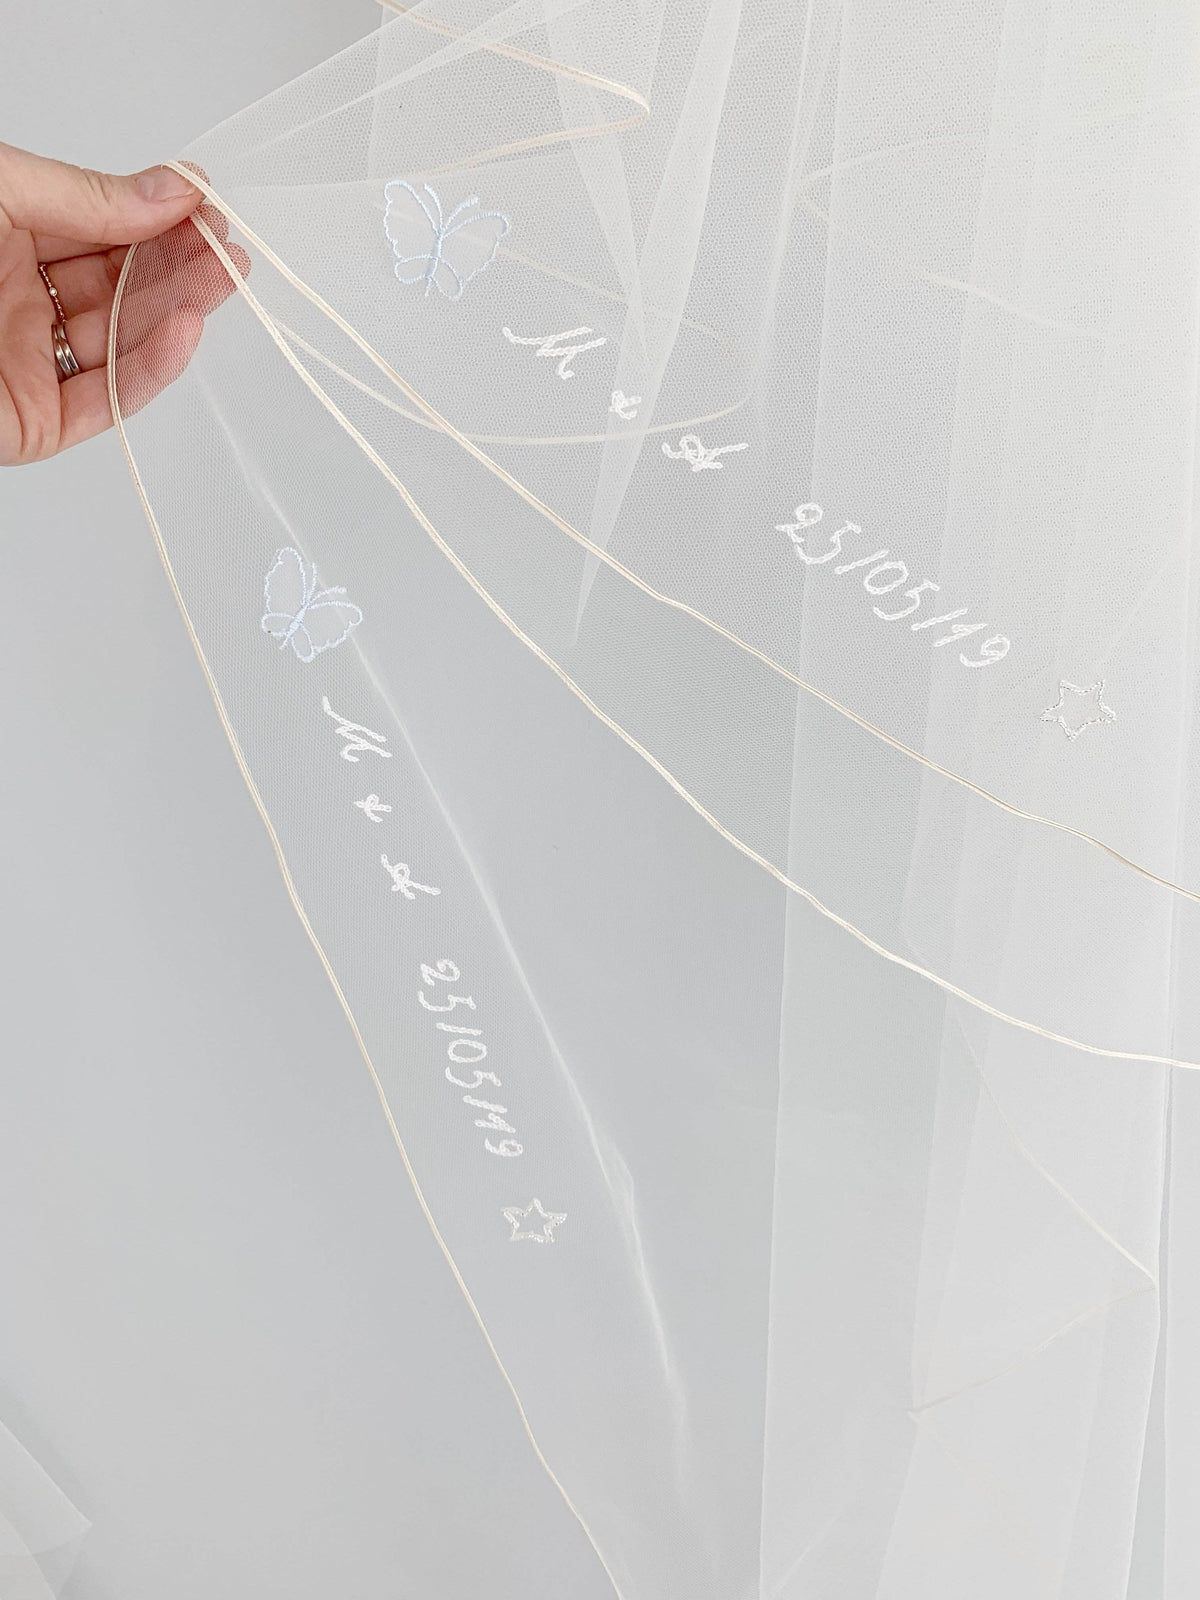 Wedding Veil Embroidery Add Personalised Embroidery to your Veil